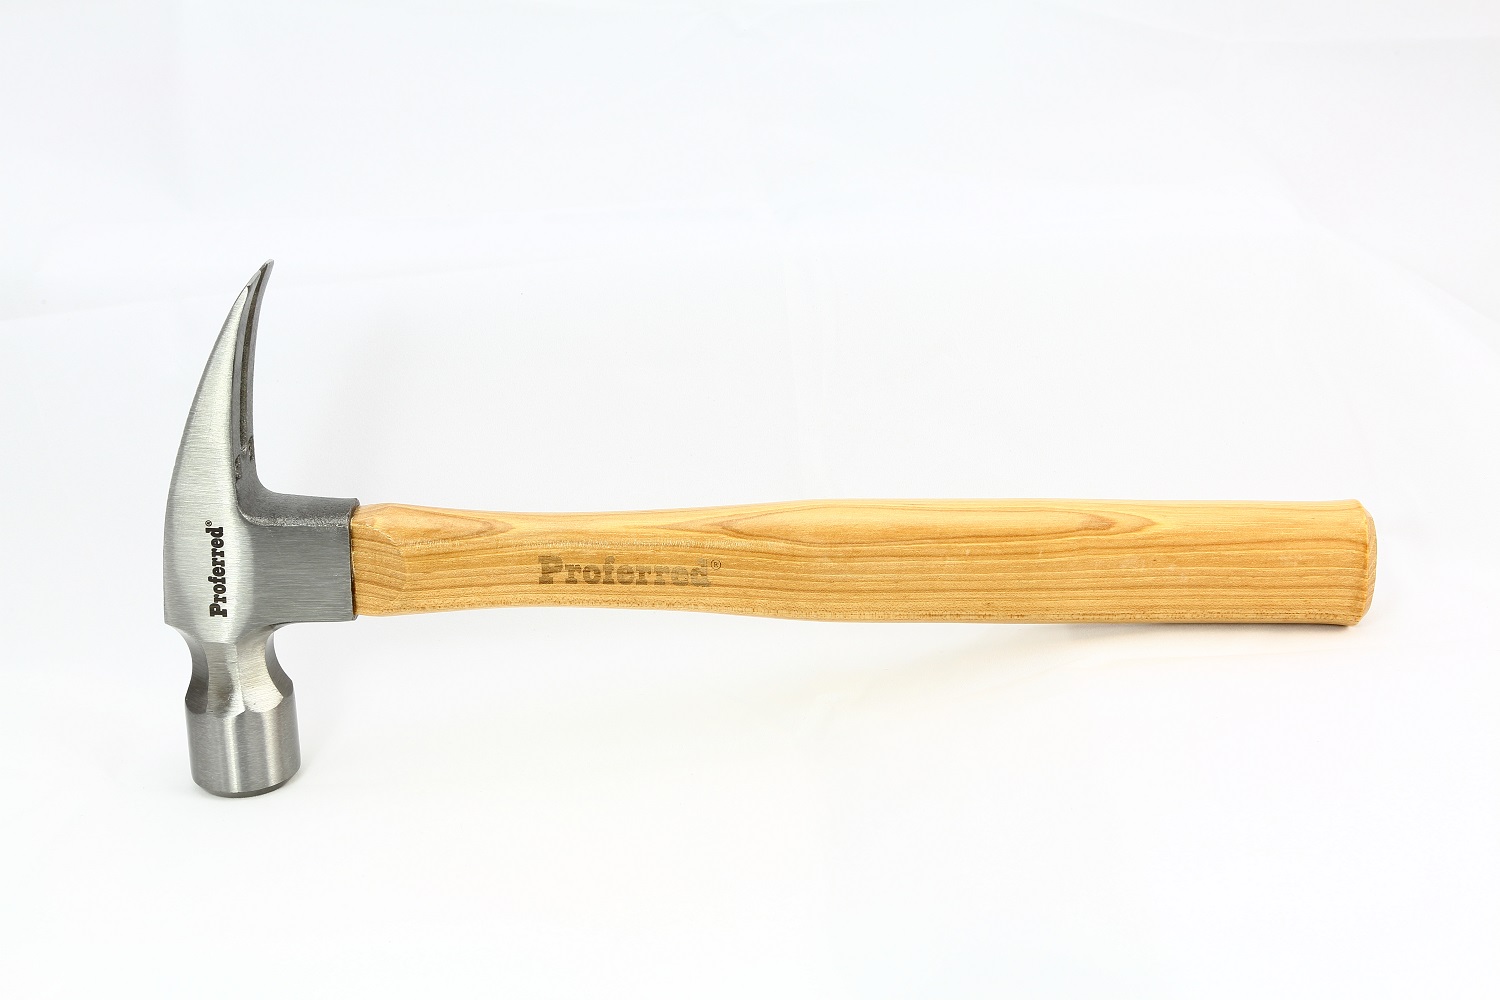 PROFERRED HAMMER 20OZ RIPPING CLAW HICKORY HANDLE